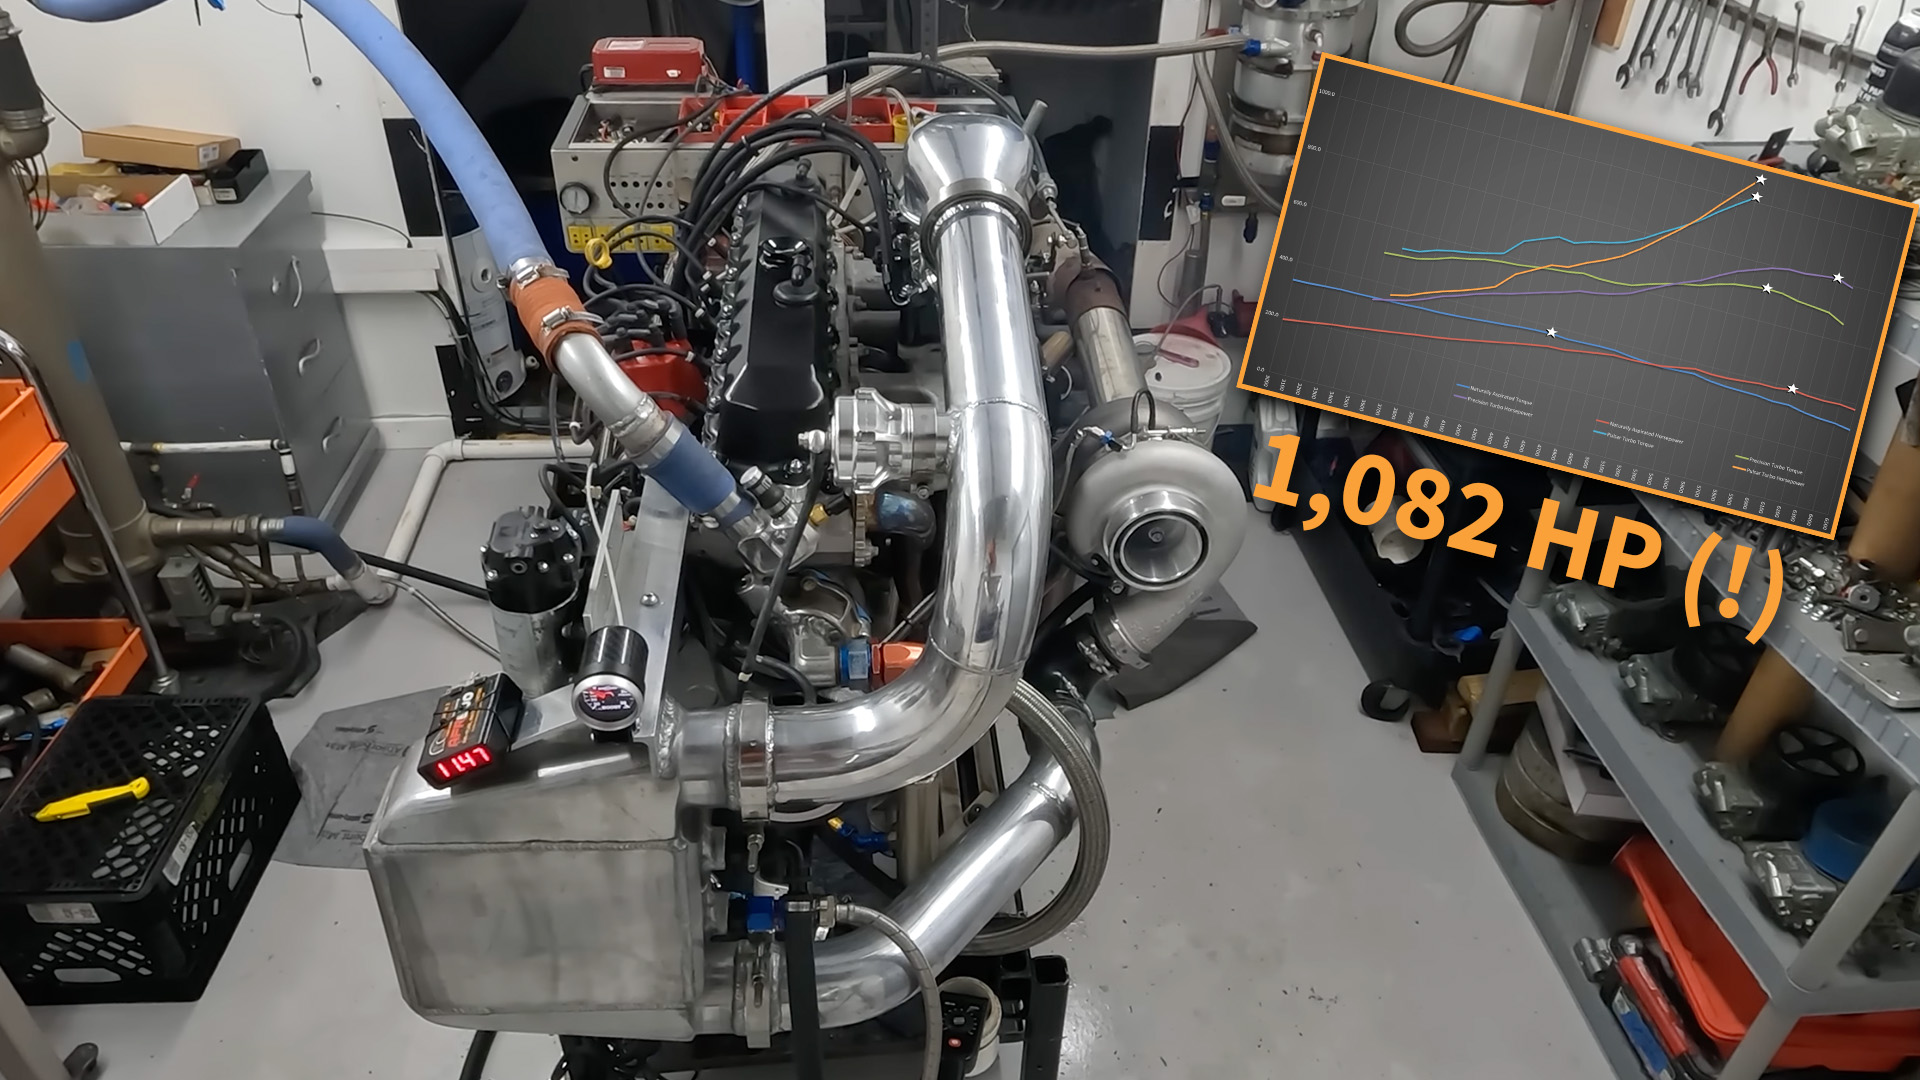 Tuner Boosts Jeep 4.0L Inline-Six Past 1,000 HP—And It’s Not Done Yet